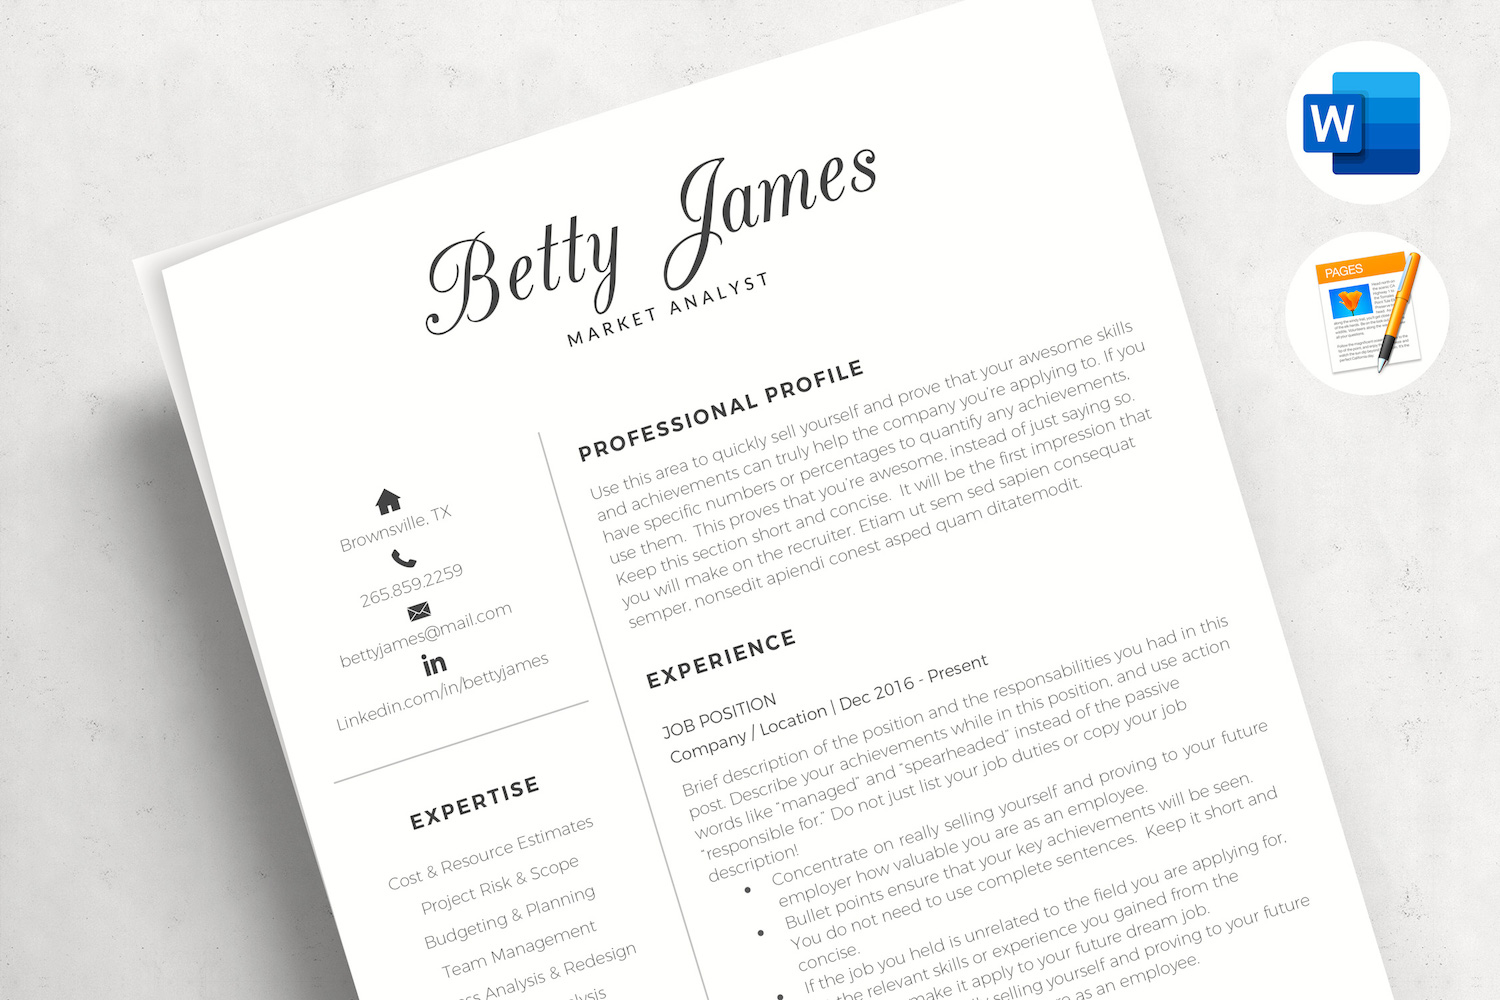 BETTY - Market Analyst Professional Resume. Minimalist CV with matching Cover & references